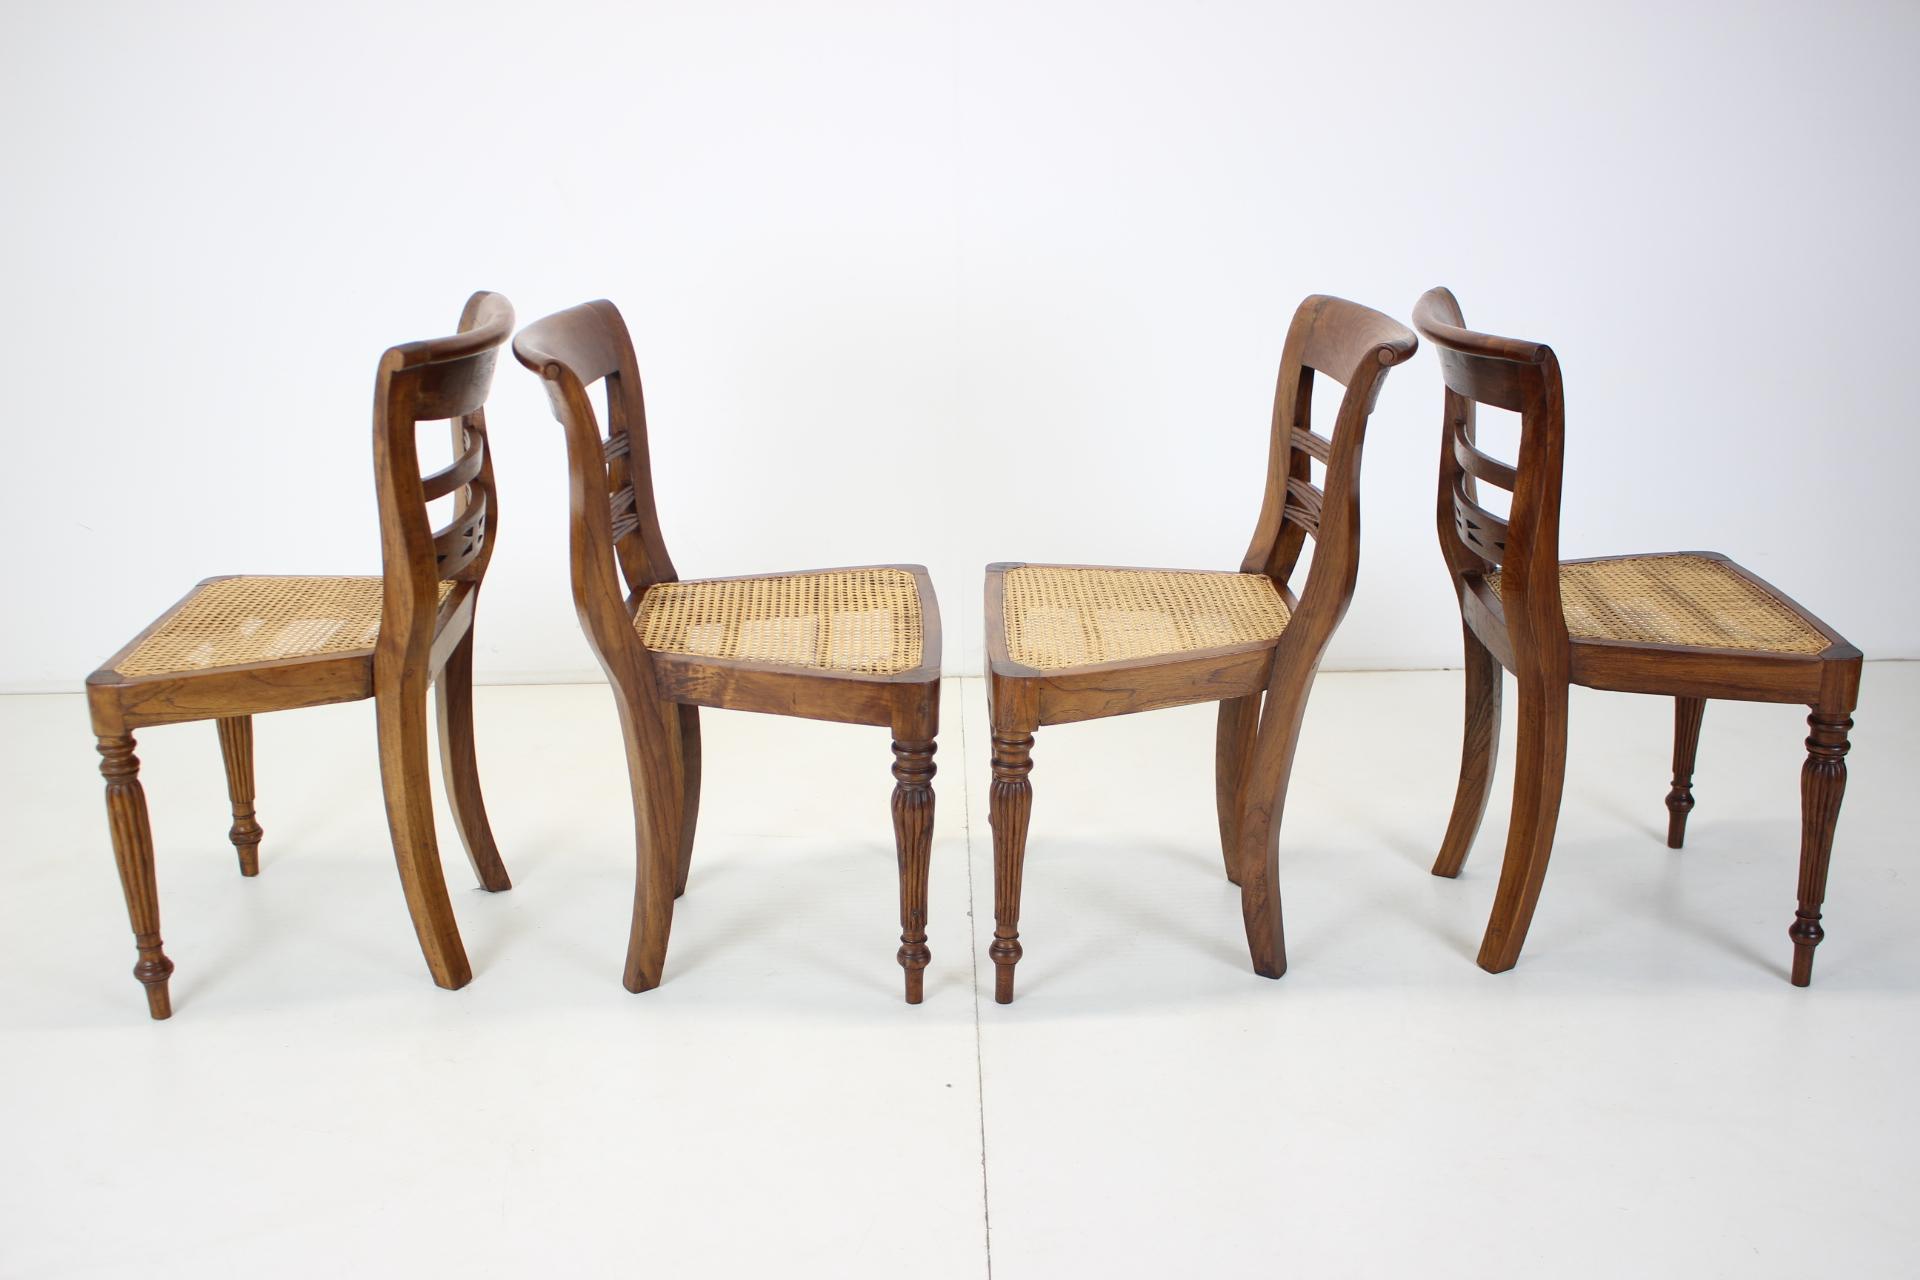 Set of Four Dining Chairs, Made of Solid Wood, 1950s, Czechoslovakia For Sale 1